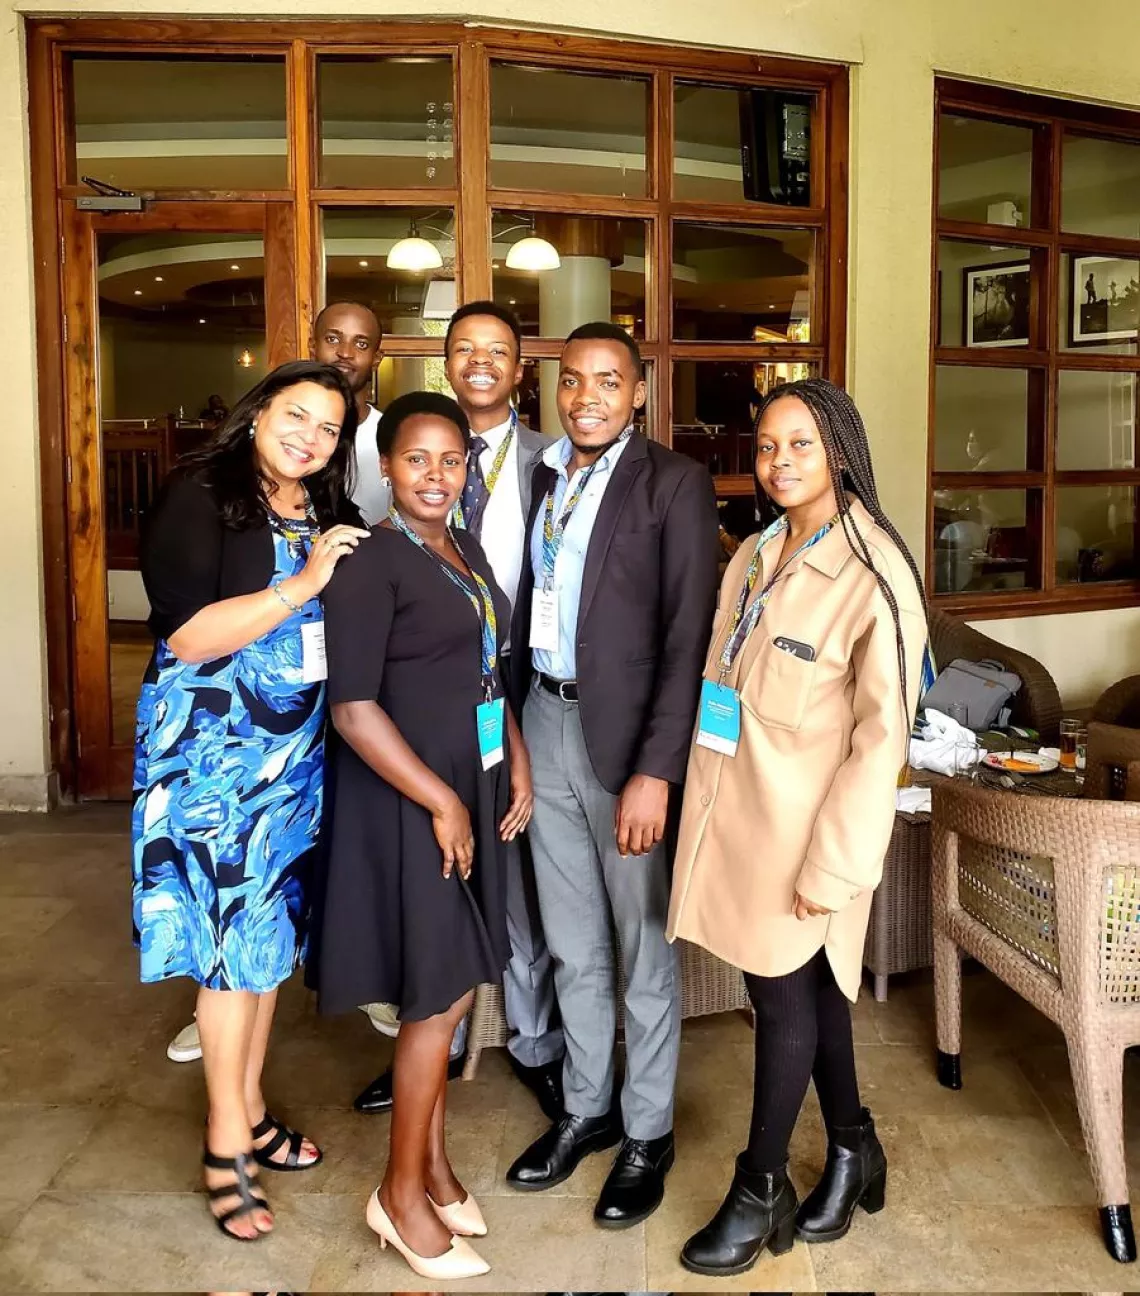 GenU team at Schools2030. GenU attended the Schools2030 Global Forum in the United Republic of Tanzania, together with four YPAT members from the Eastern and Southern Africa region: Praise Majwafi (South Africa), Anastase Ndagijimana (Rwanda), Karabo Mokgonyana (South Africa) and Priscilla Kusuro (Uganda). 